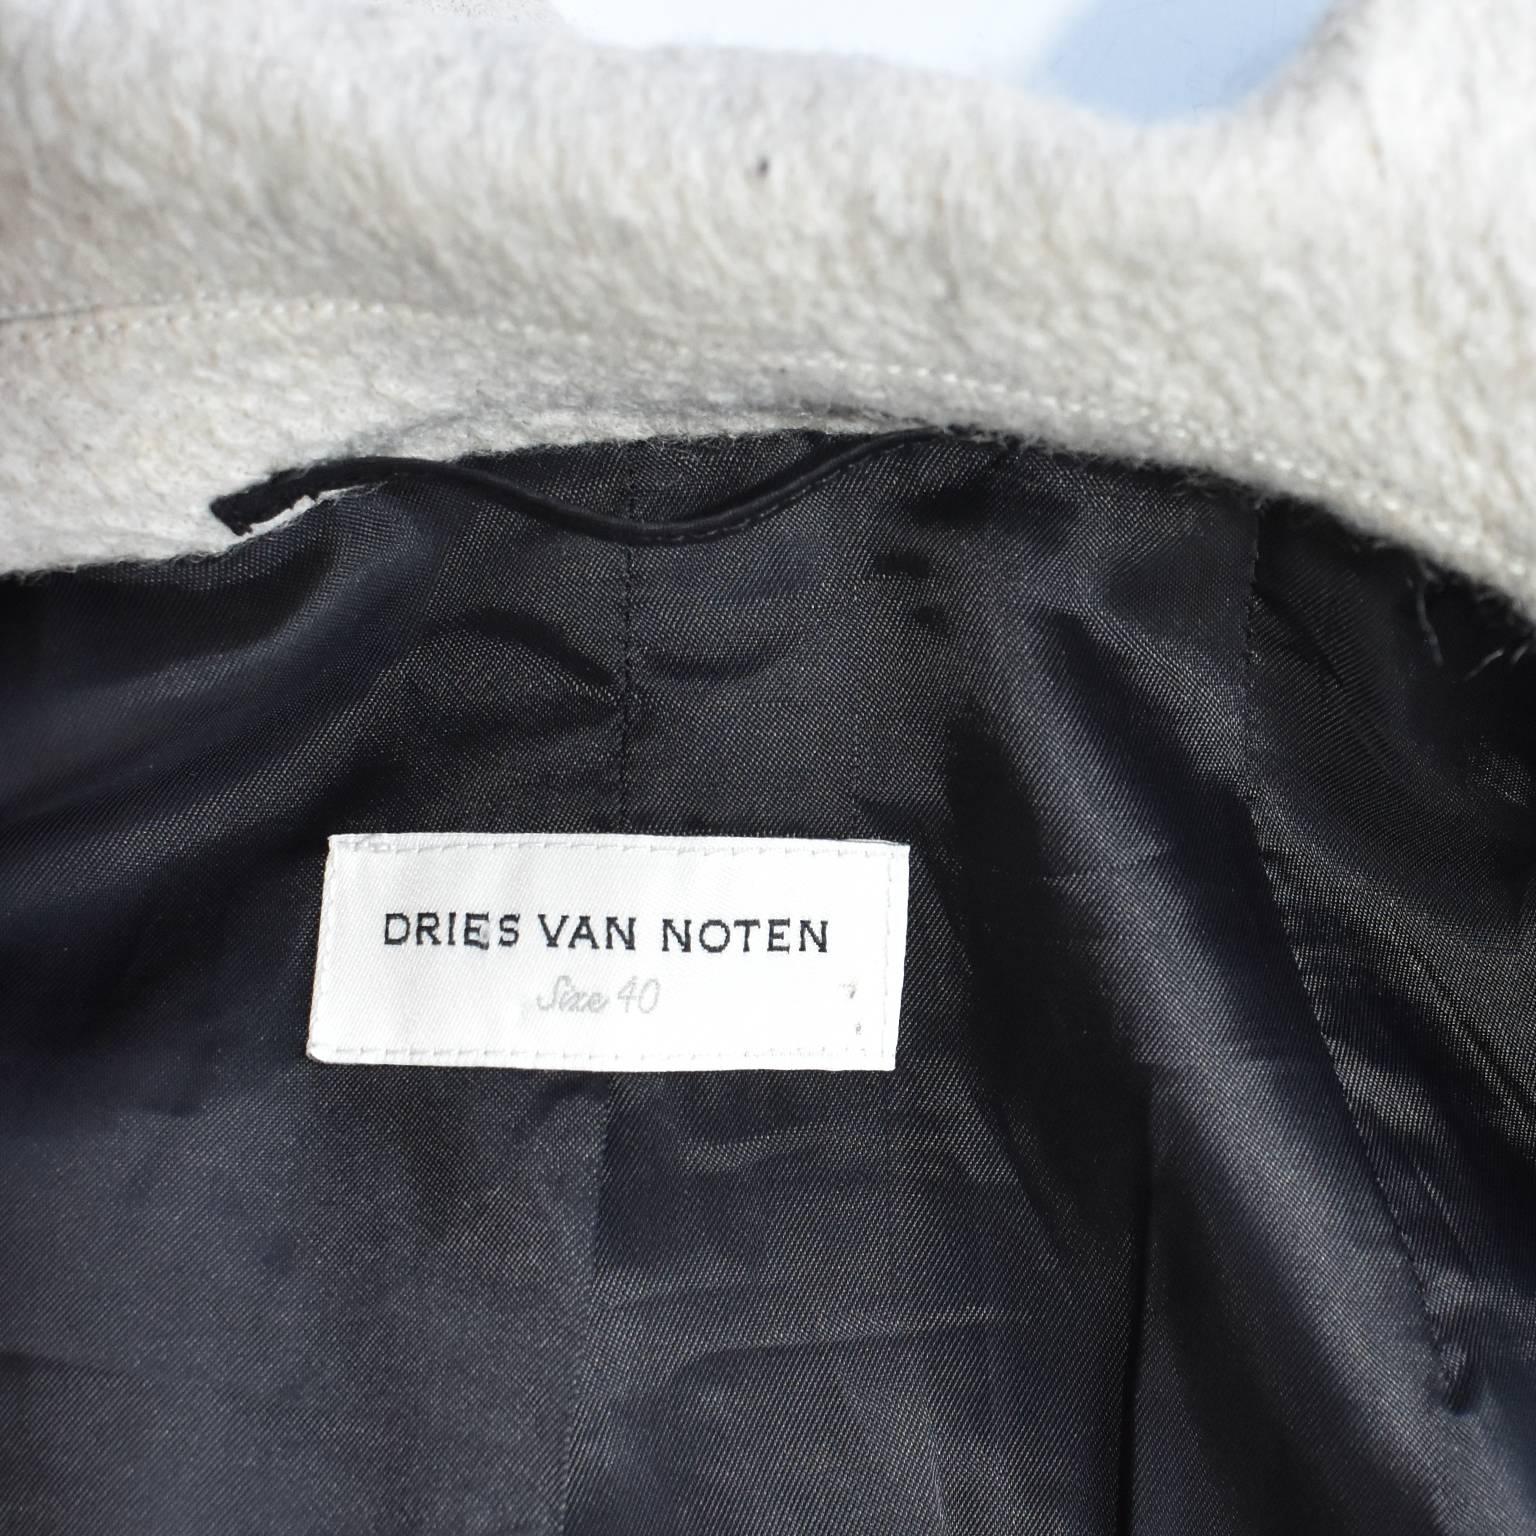 Dries Van Noten Sand Textured Coat with Balloon Sleeves In Excellent Condition For Sale In London, GB